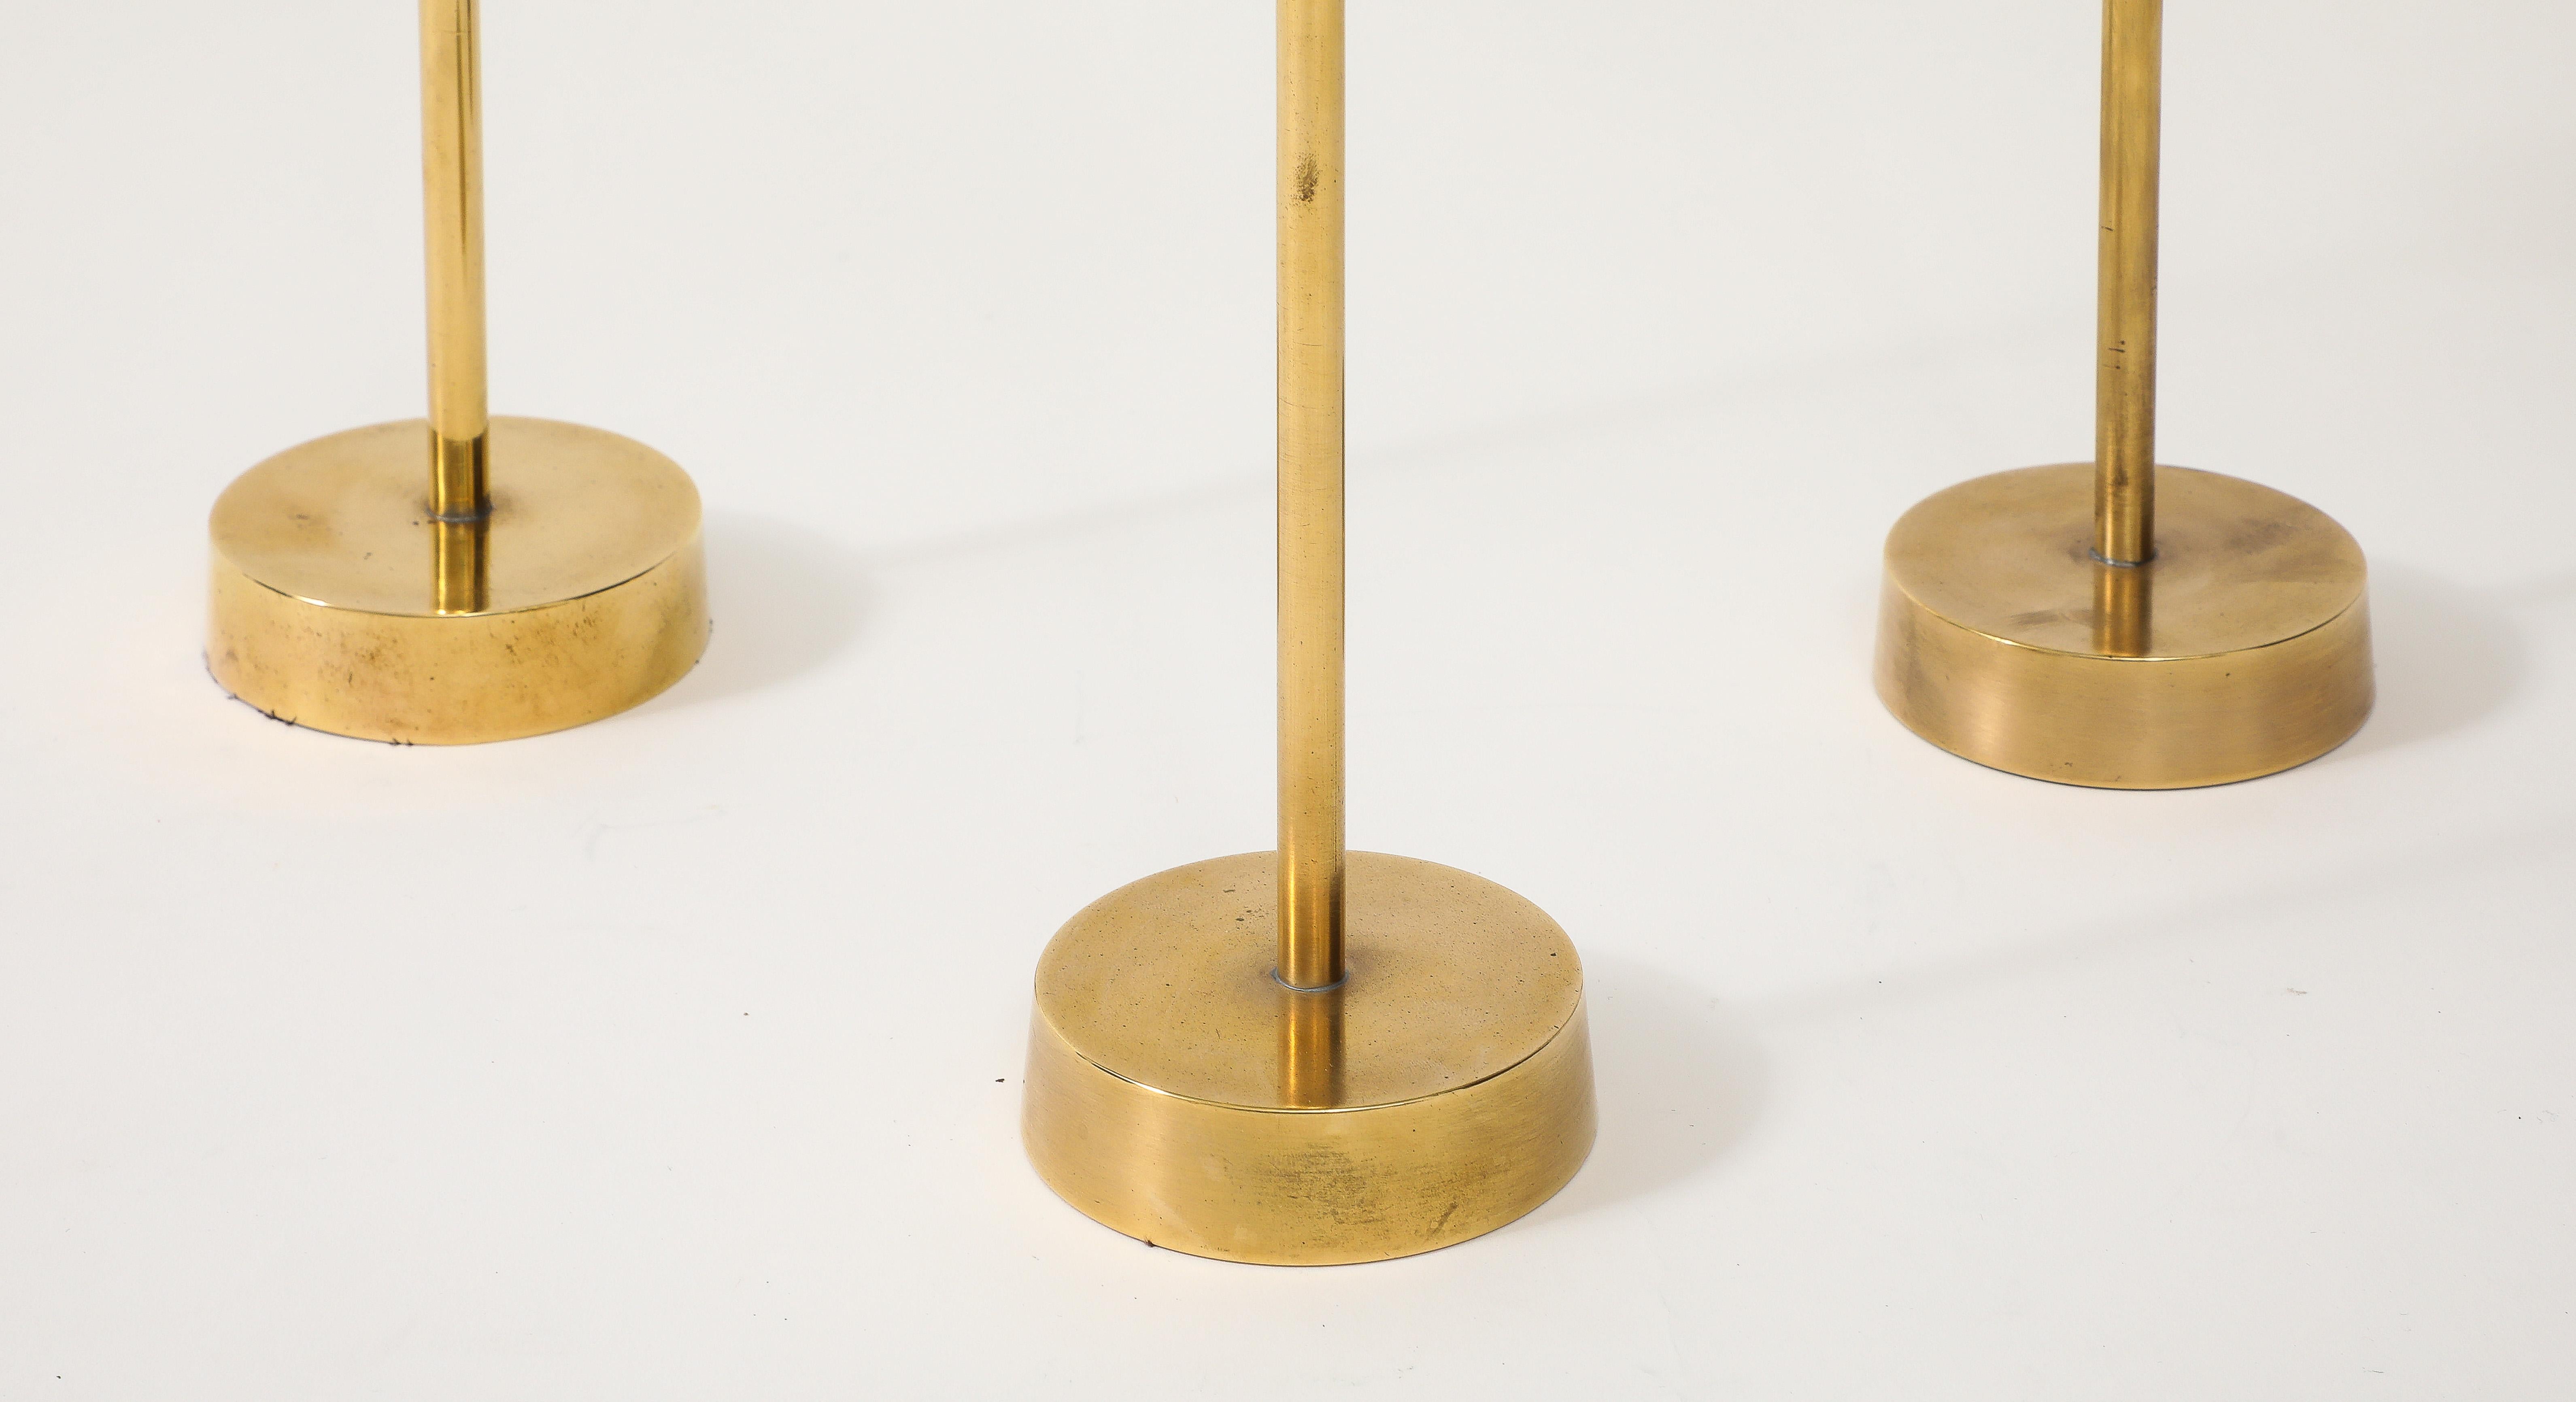 1970's brutalist style solid brass candle holders set of 3, in vintage original condition with minor wear and patina to the brass due to age and use. 